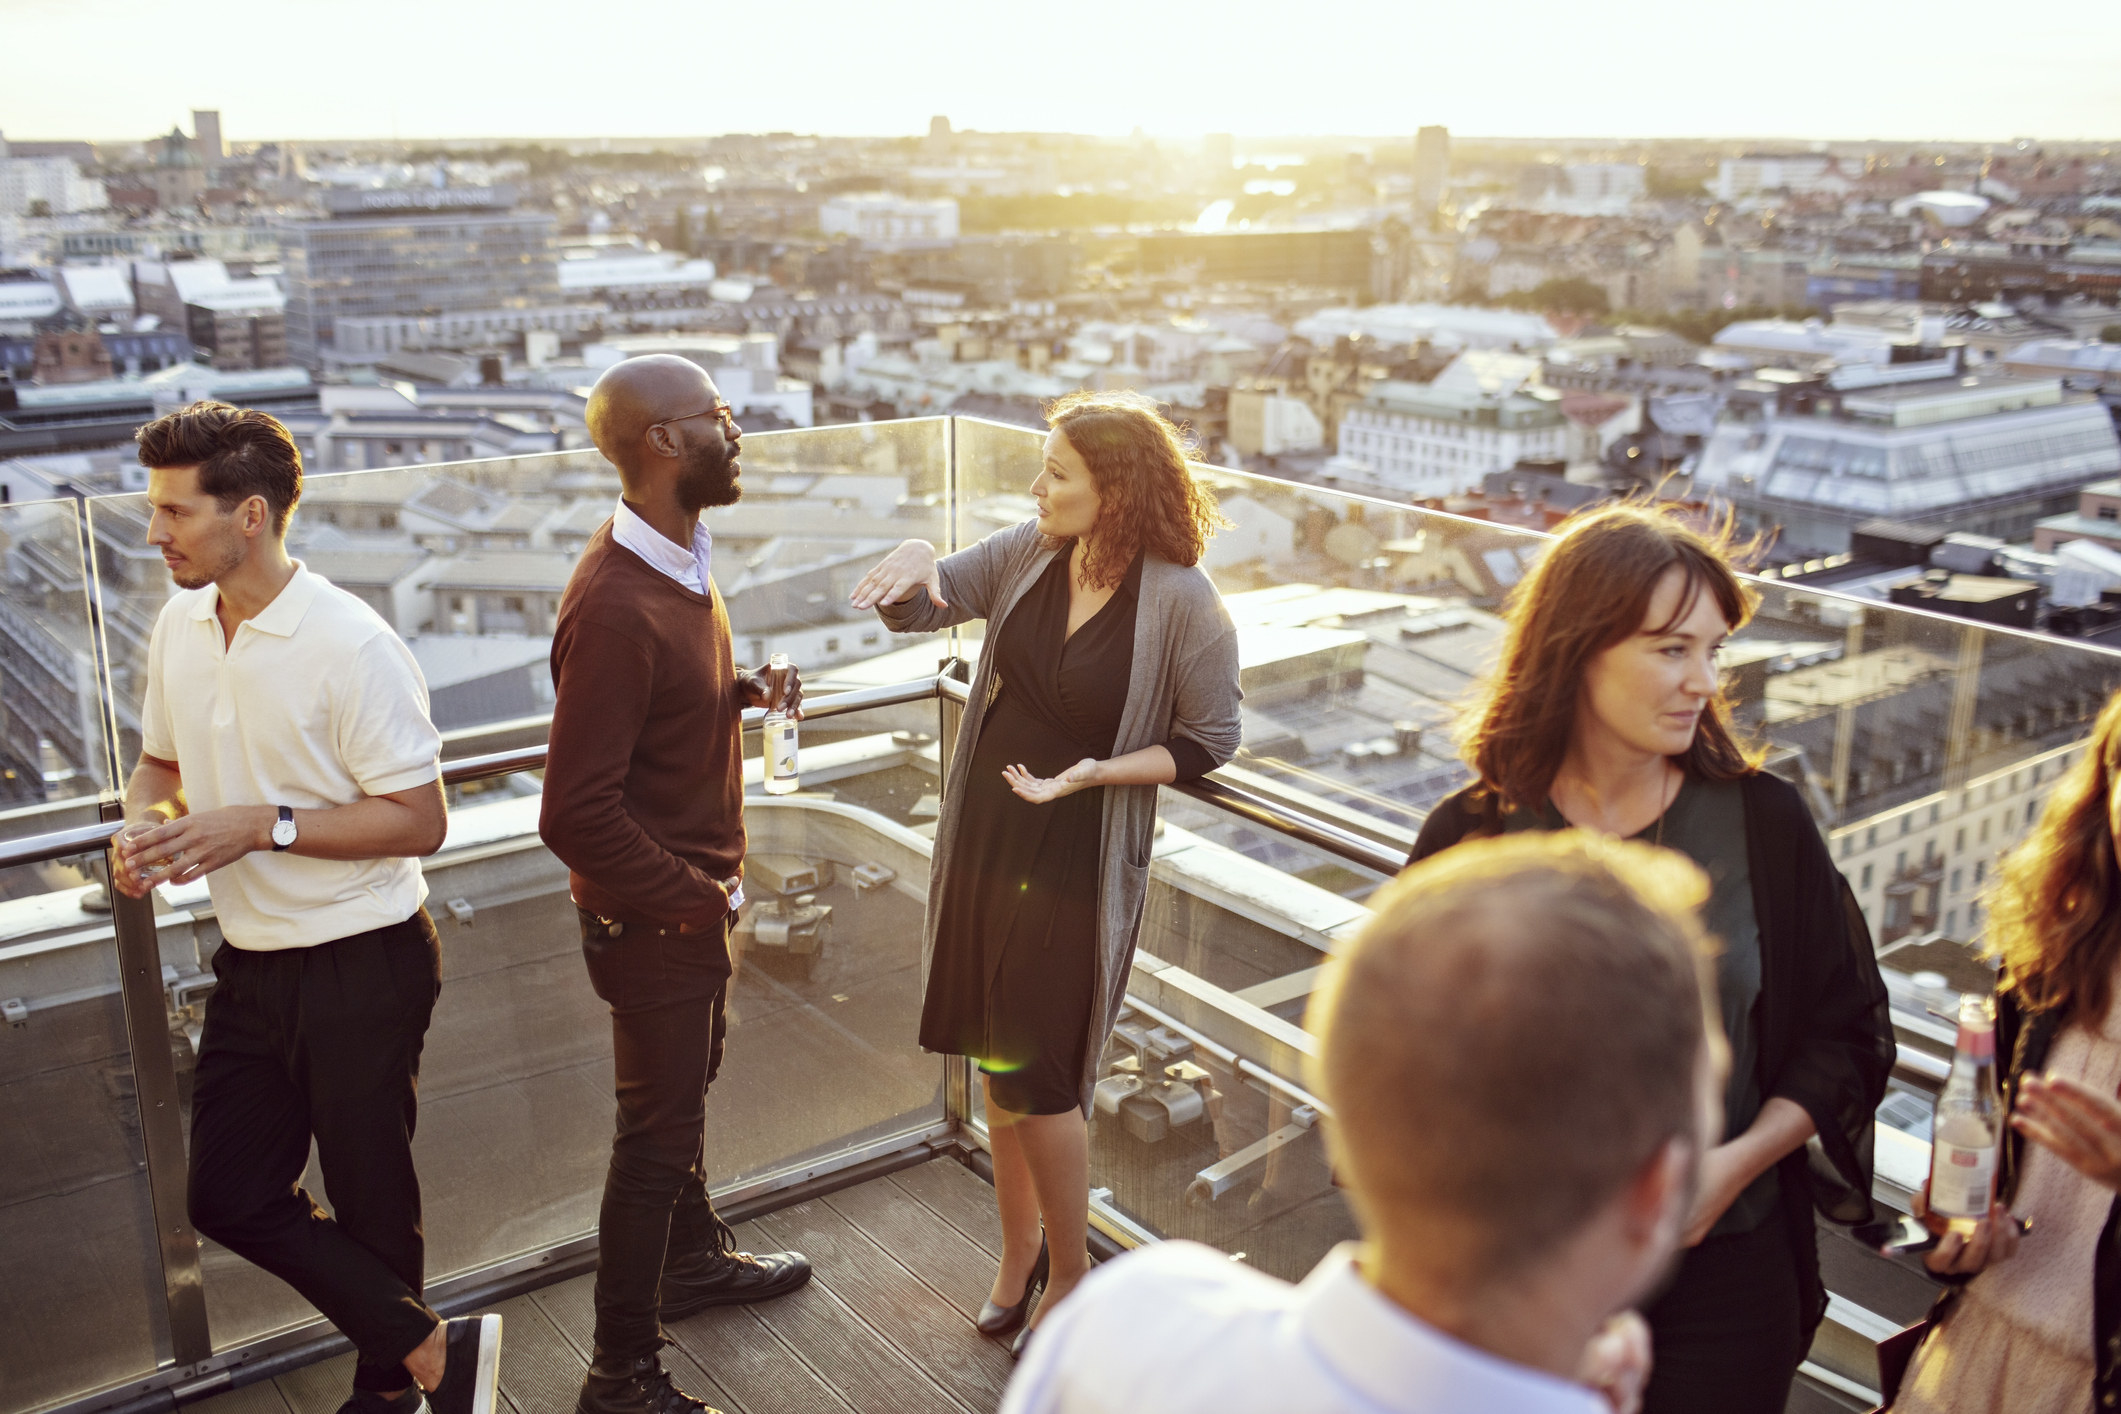 People networking on a rooftop